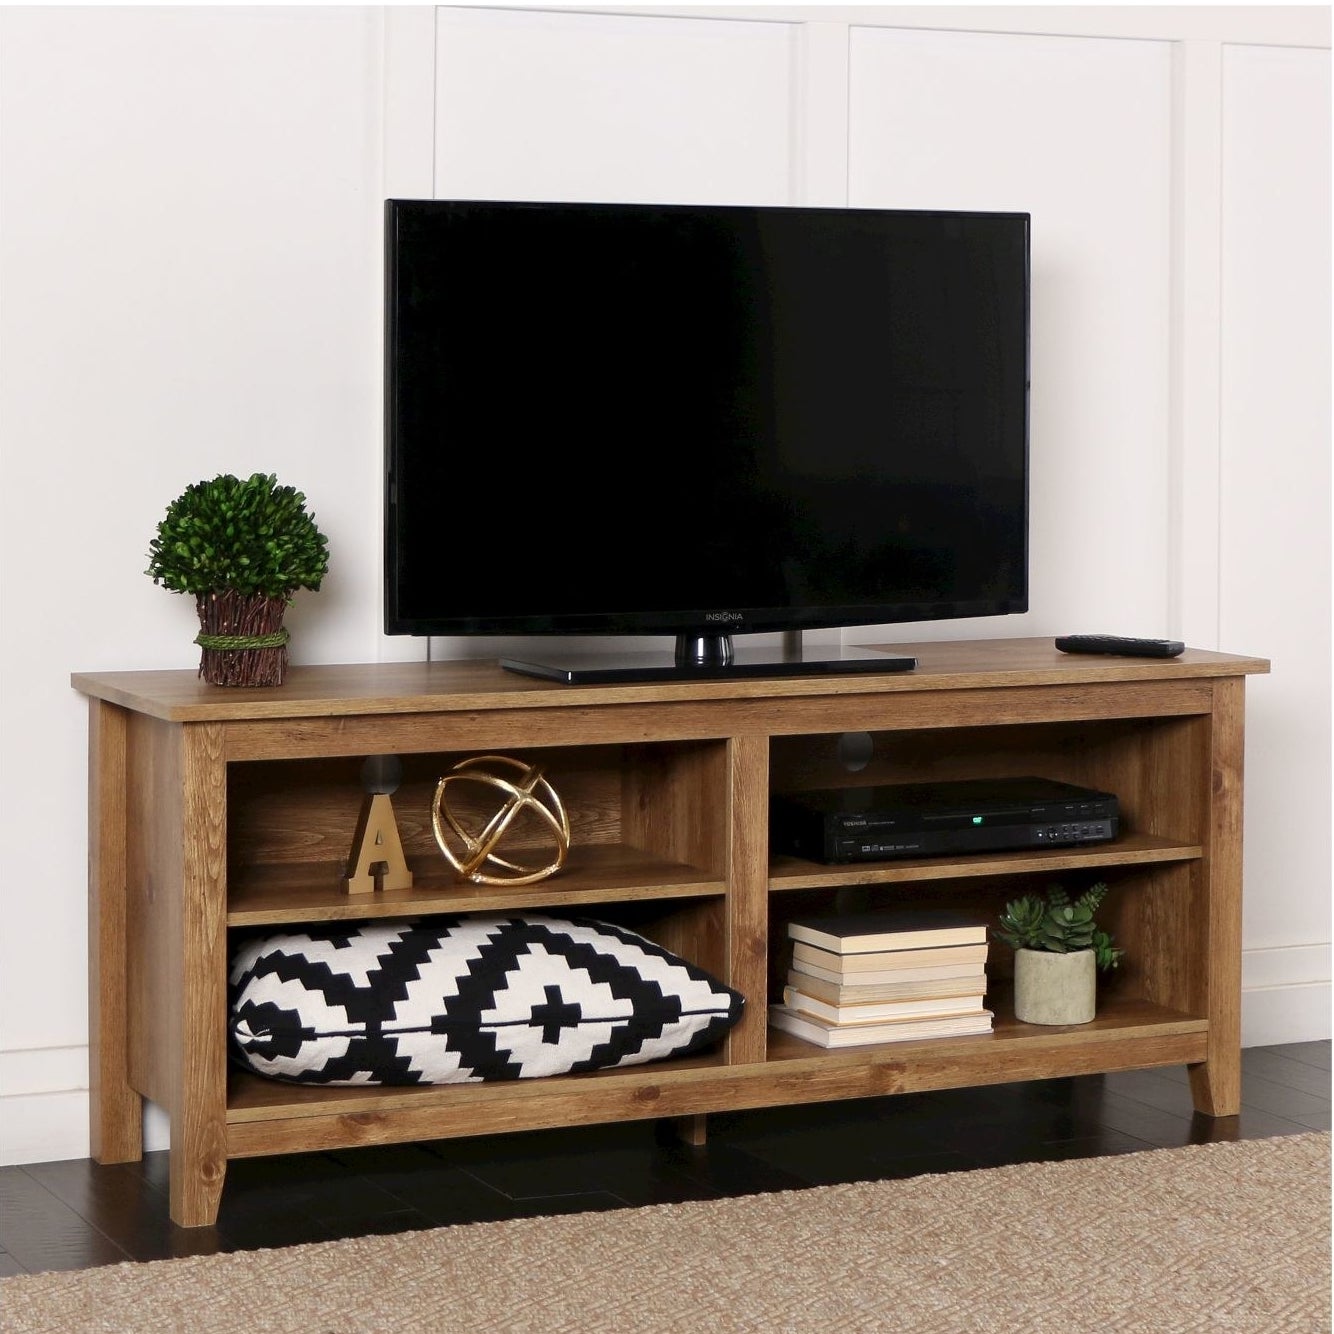 wood TV stand with shelves and a TV on top